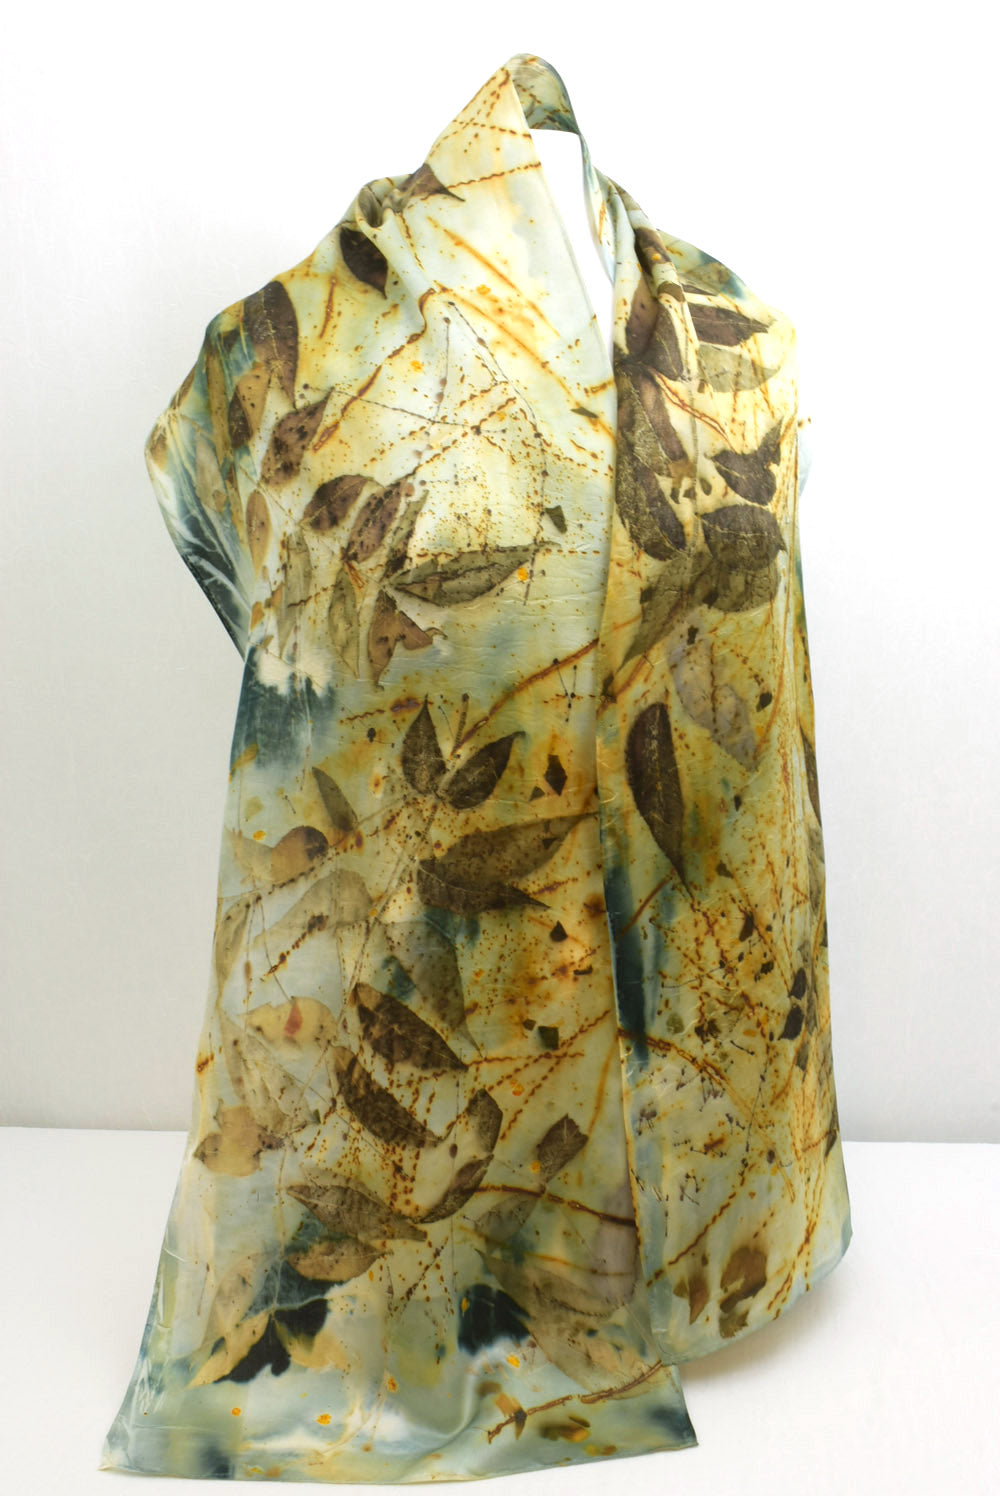 Natural Hand Dyed Eco Printed Wearable Art Fashion Silk Satin Scarf Accessory